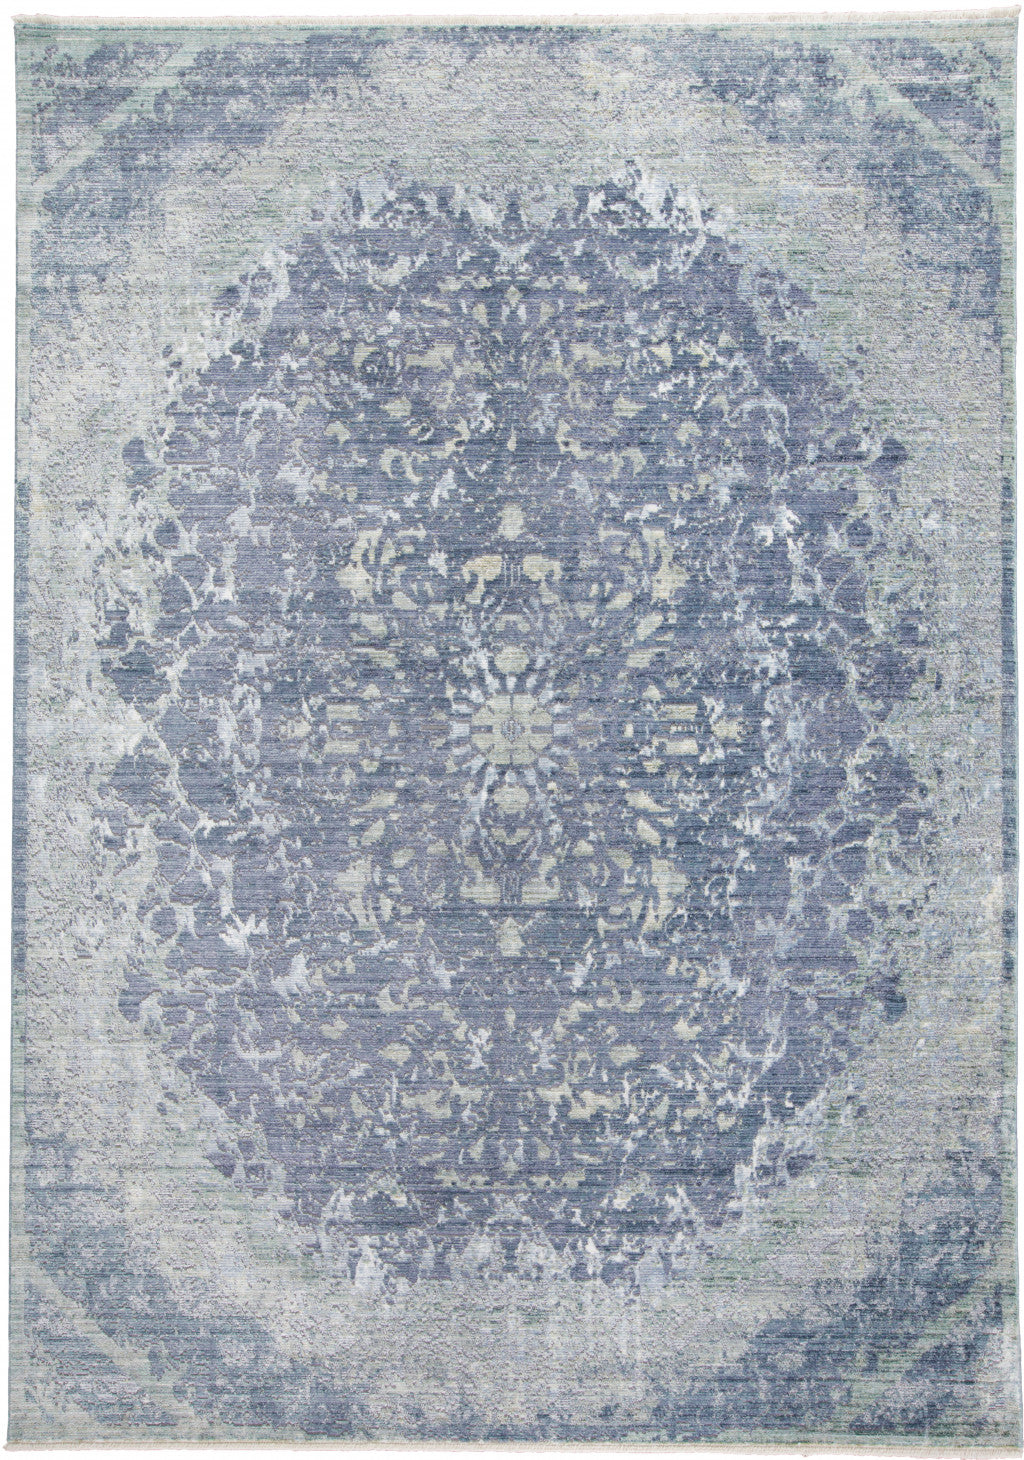 5' X 8' Blue Gray And Silver Abstract Distressed Area Rug With Fringe